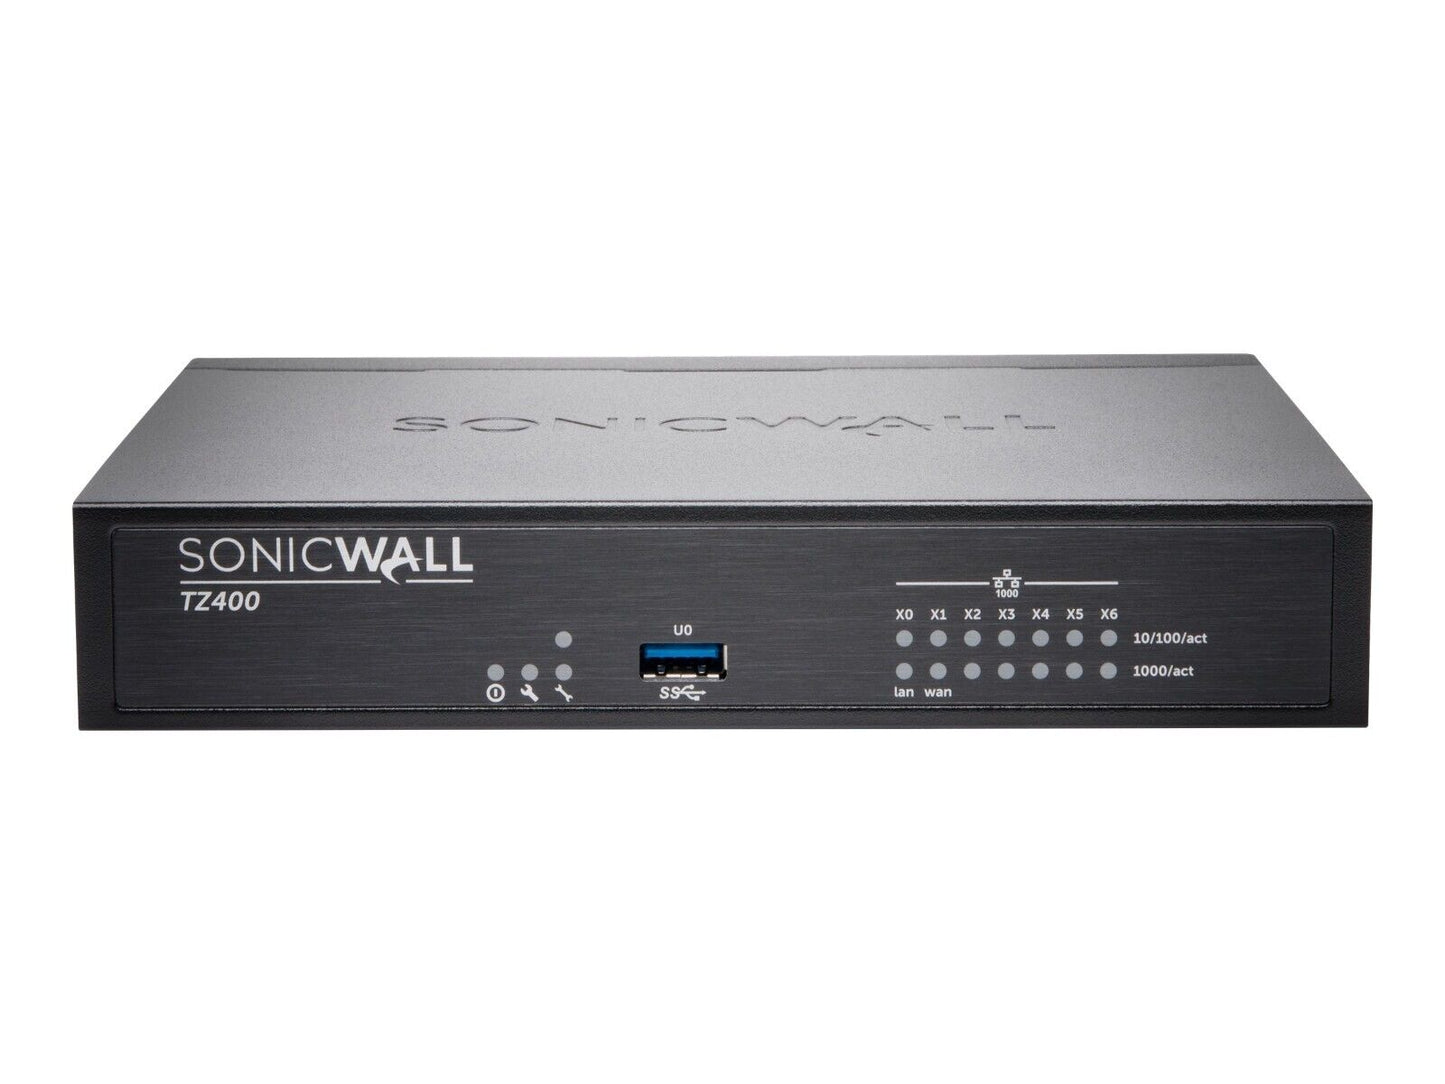 SonicWall TZ400 Security Appliance - 01-SSC-0213 New